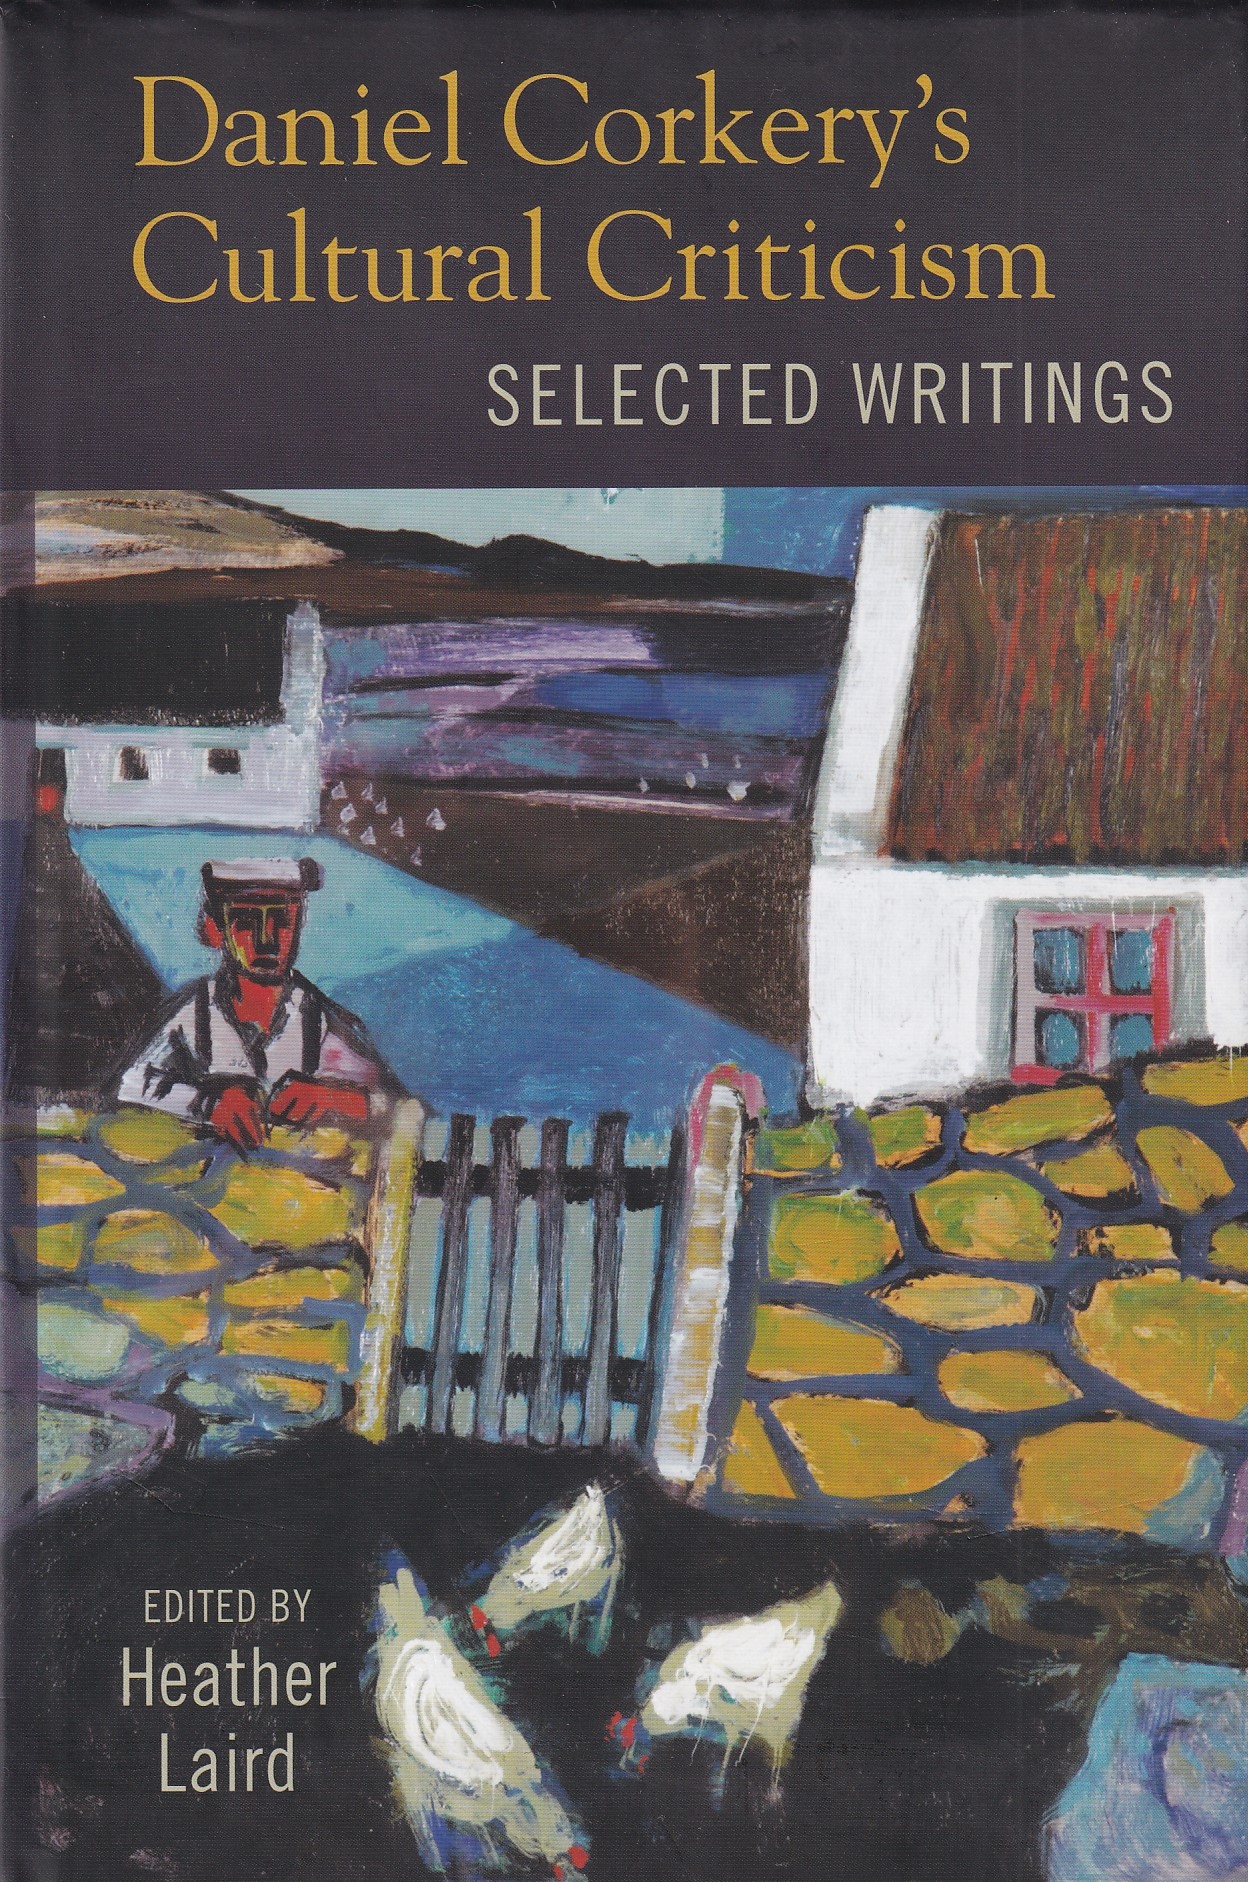 Daniel Corkery’s Cultural Criticism: Selected Writings by Heather Laird (ed.)